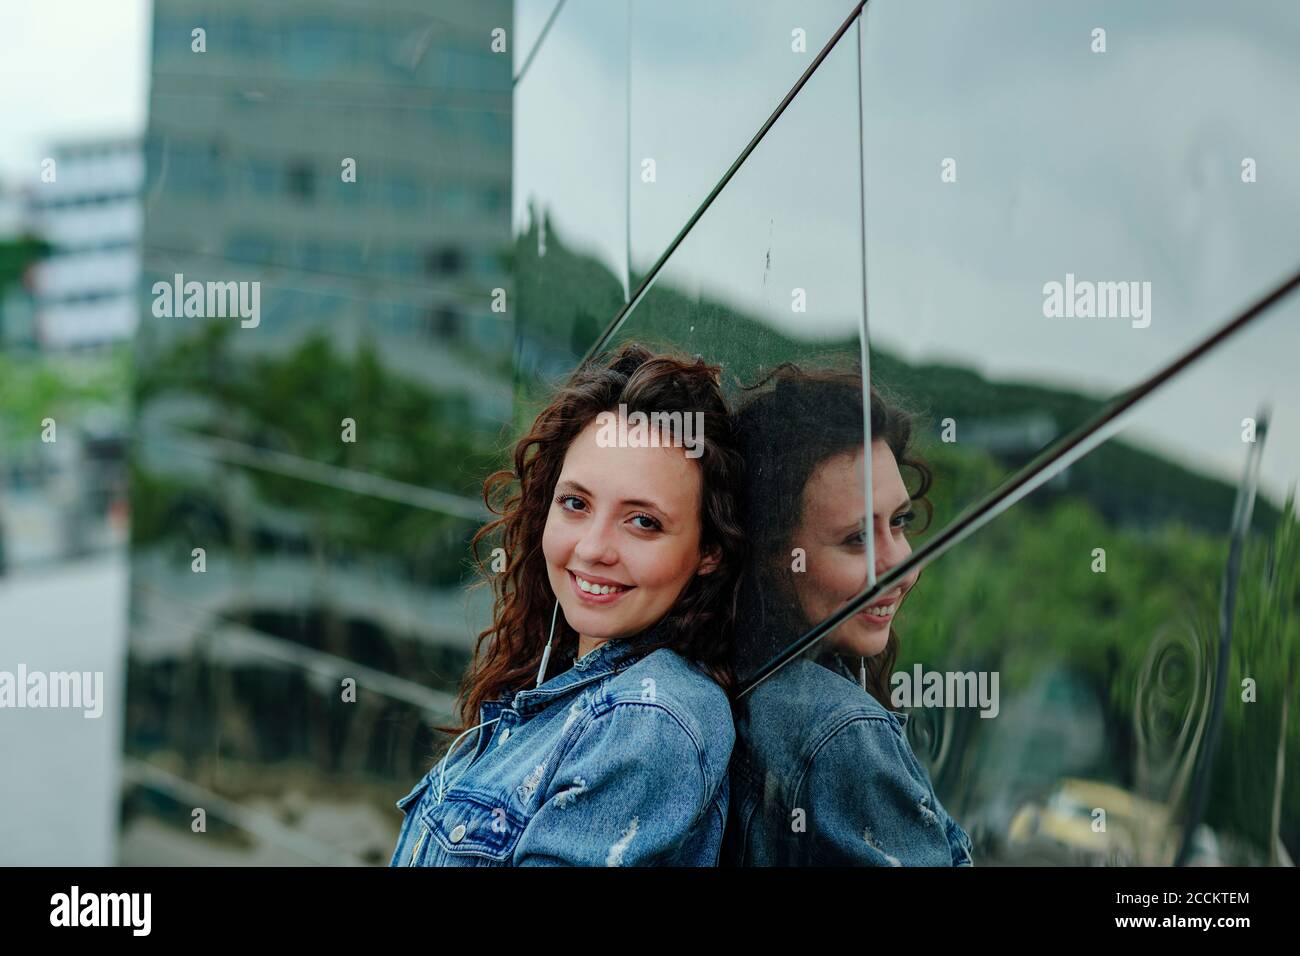 Smiling young woman leaning on mirror wall Stock Photo